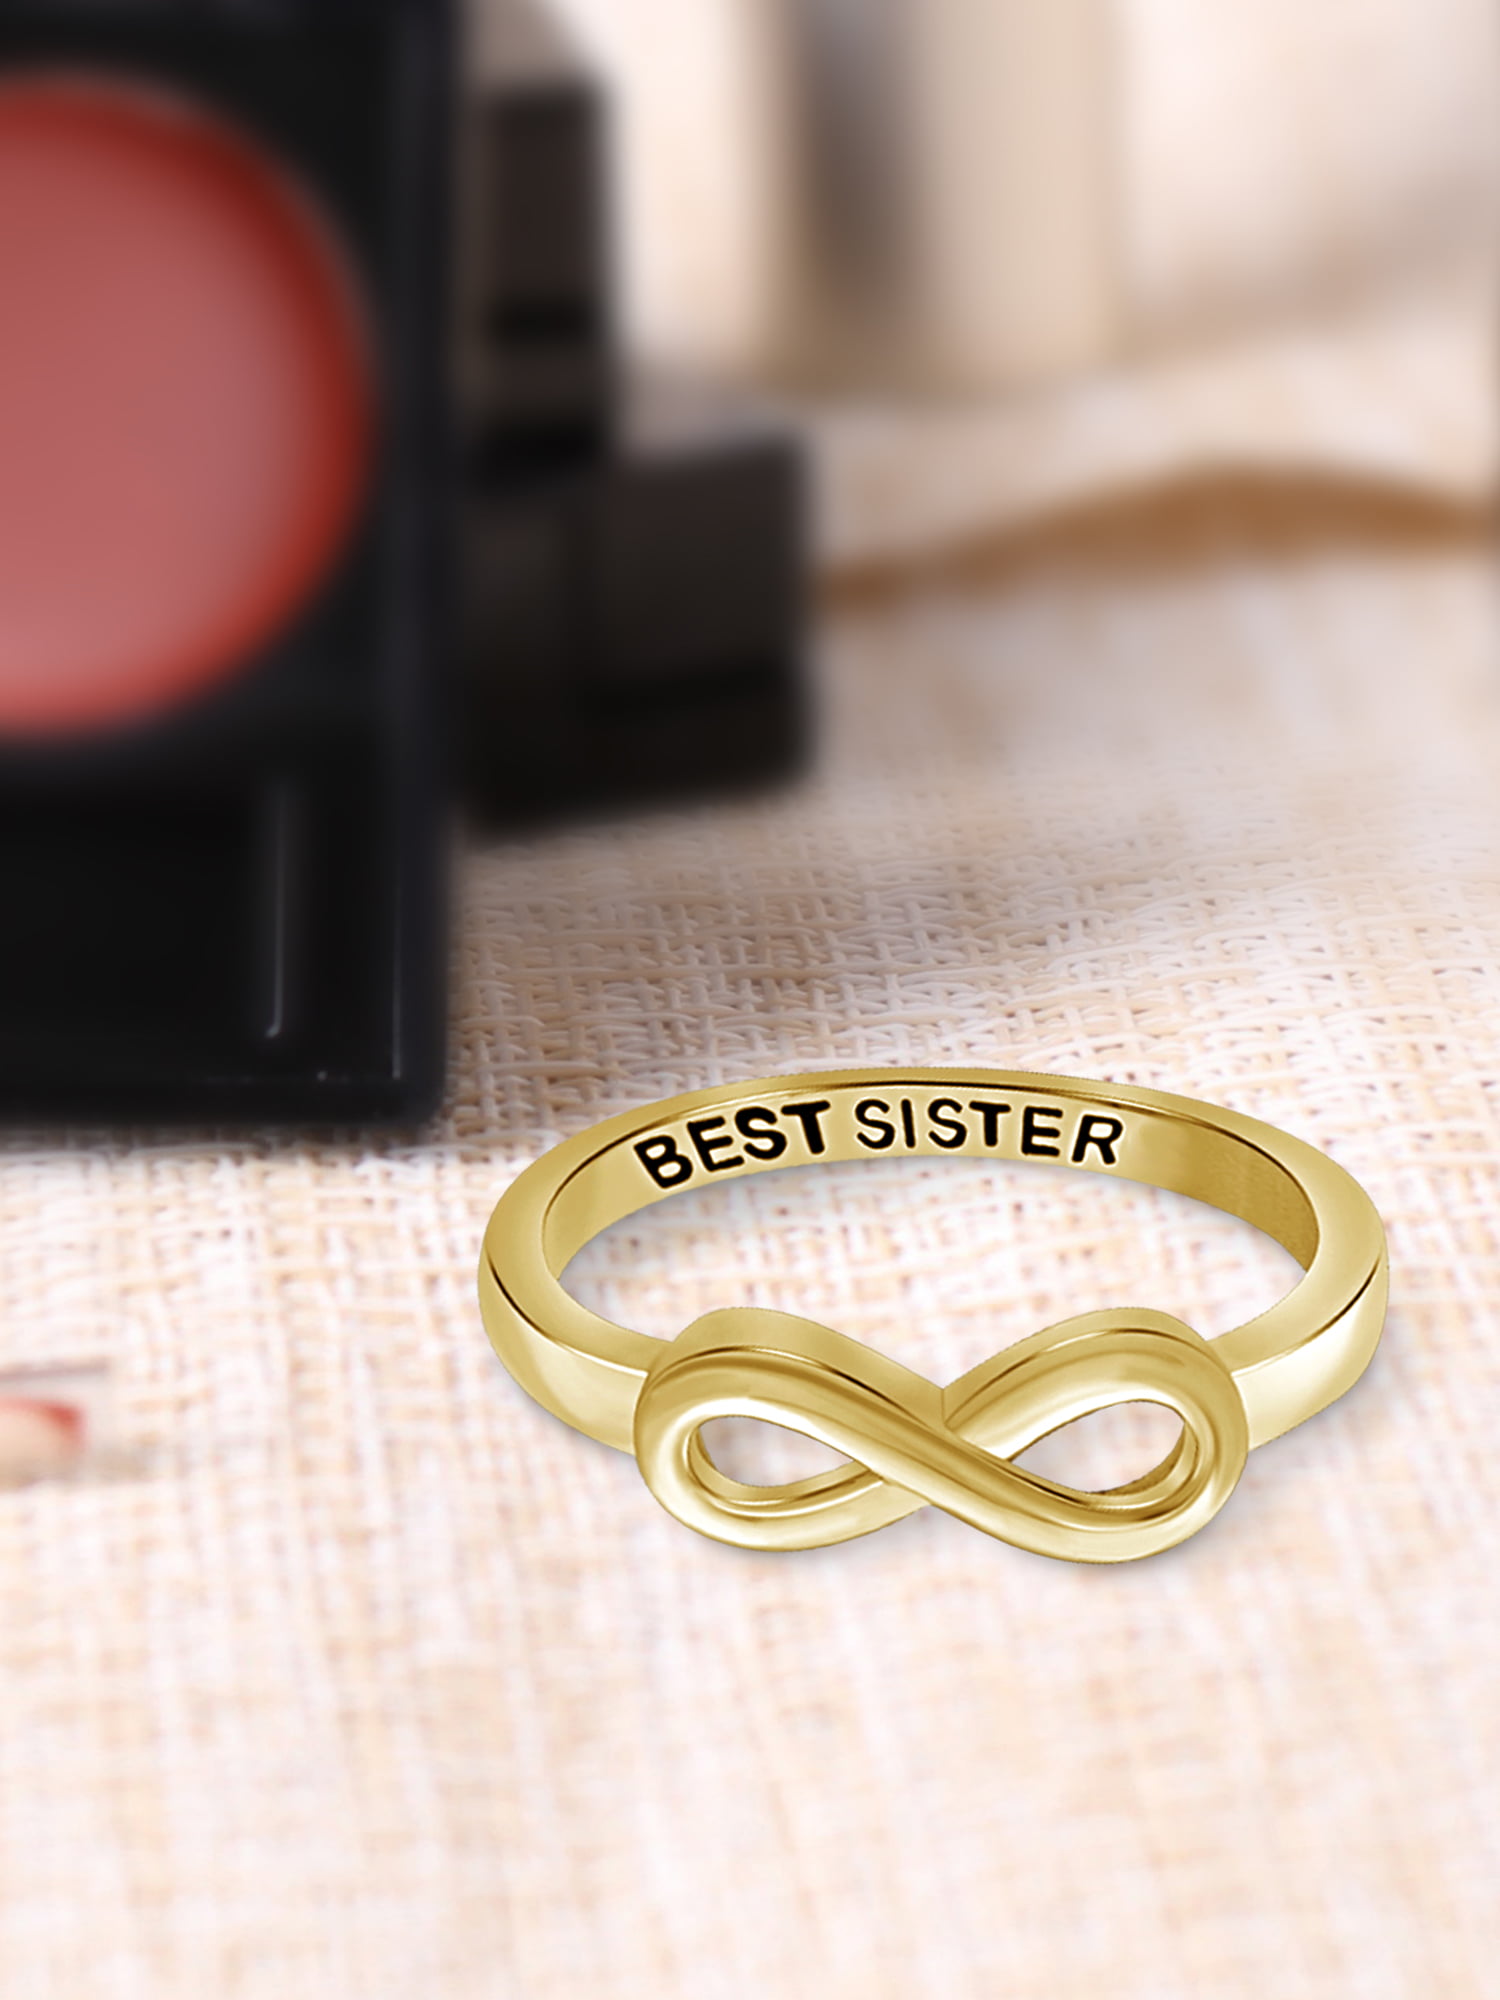 EBAT Matching Friendship Rings for 2 Friends Bff Best India | Ubuy